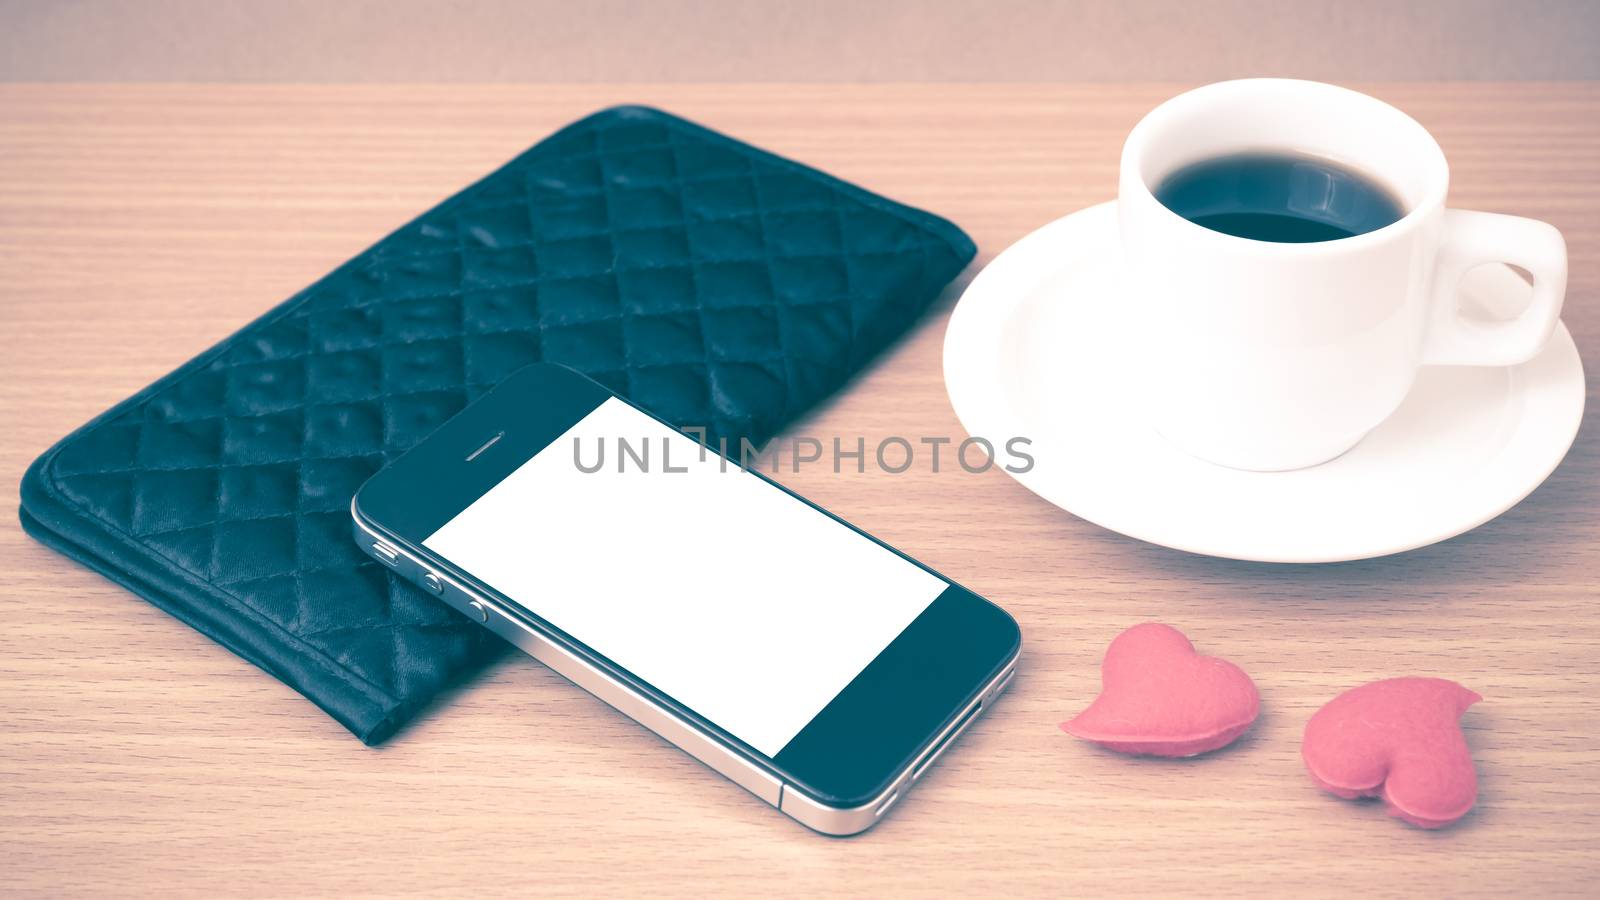 coffee,phone,wallet and heart on wood table background vintage style